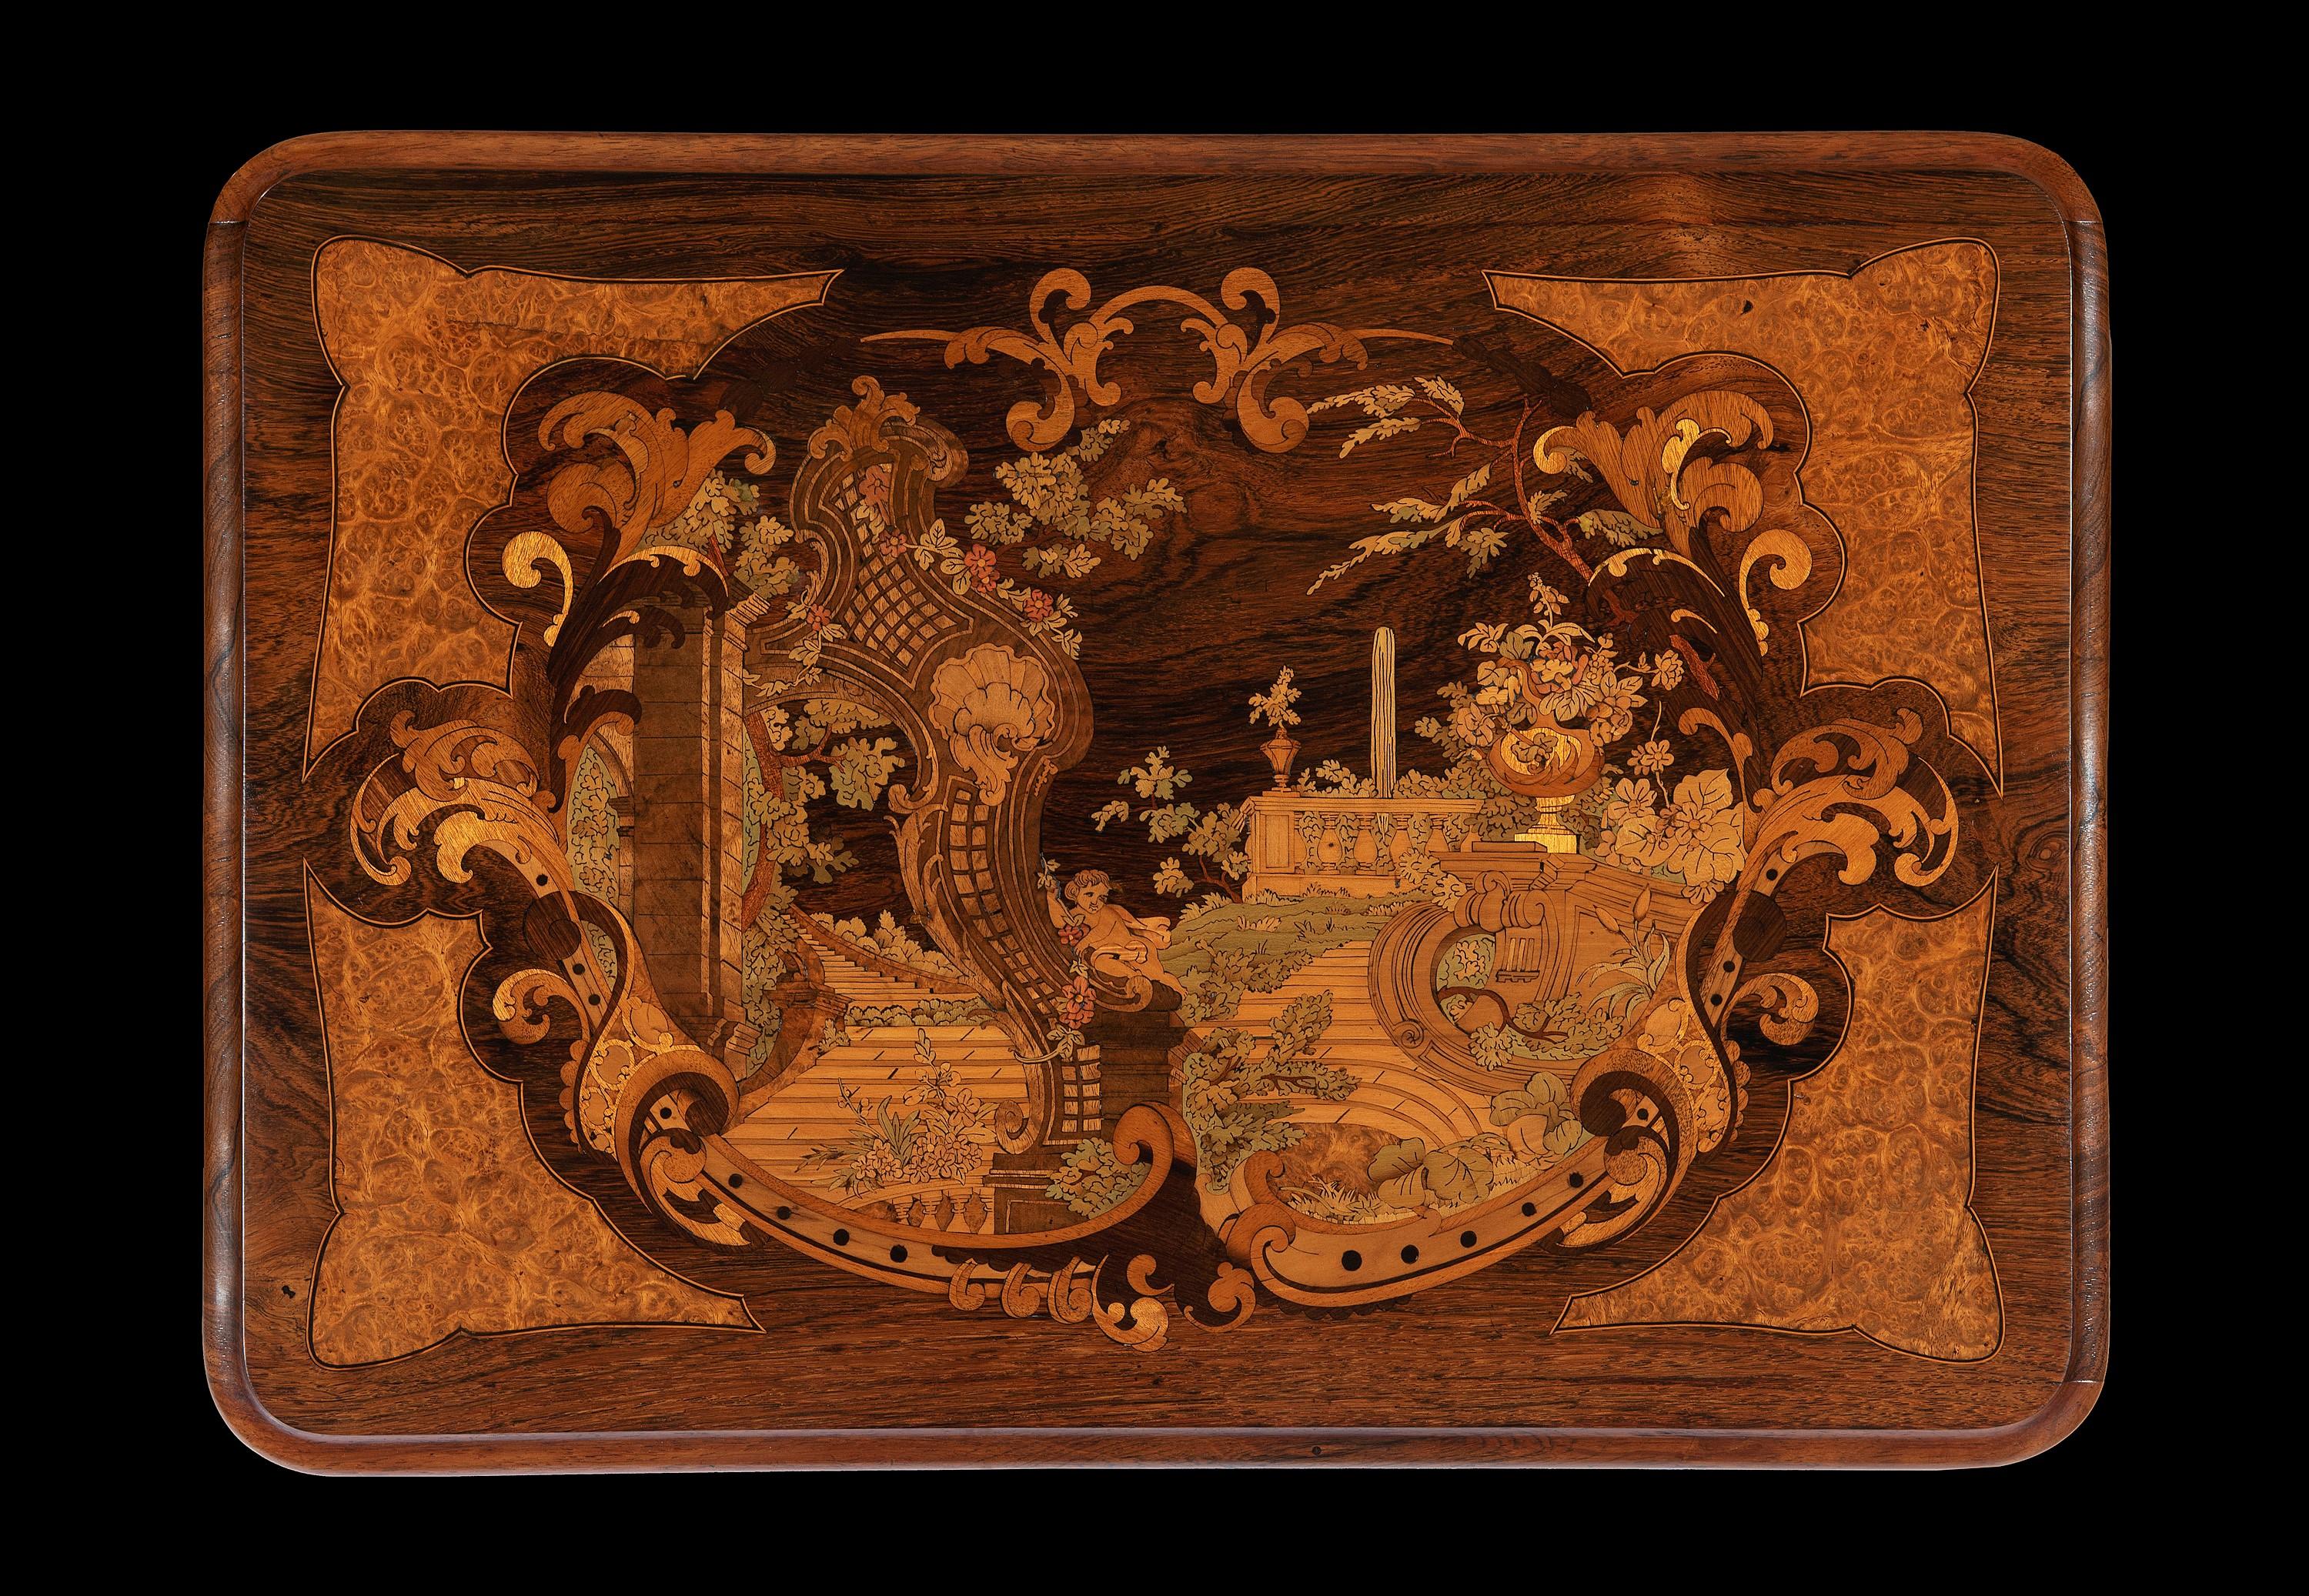 The intricate inlays depicting a cherub within a mansions formal gardens
Measures: 26